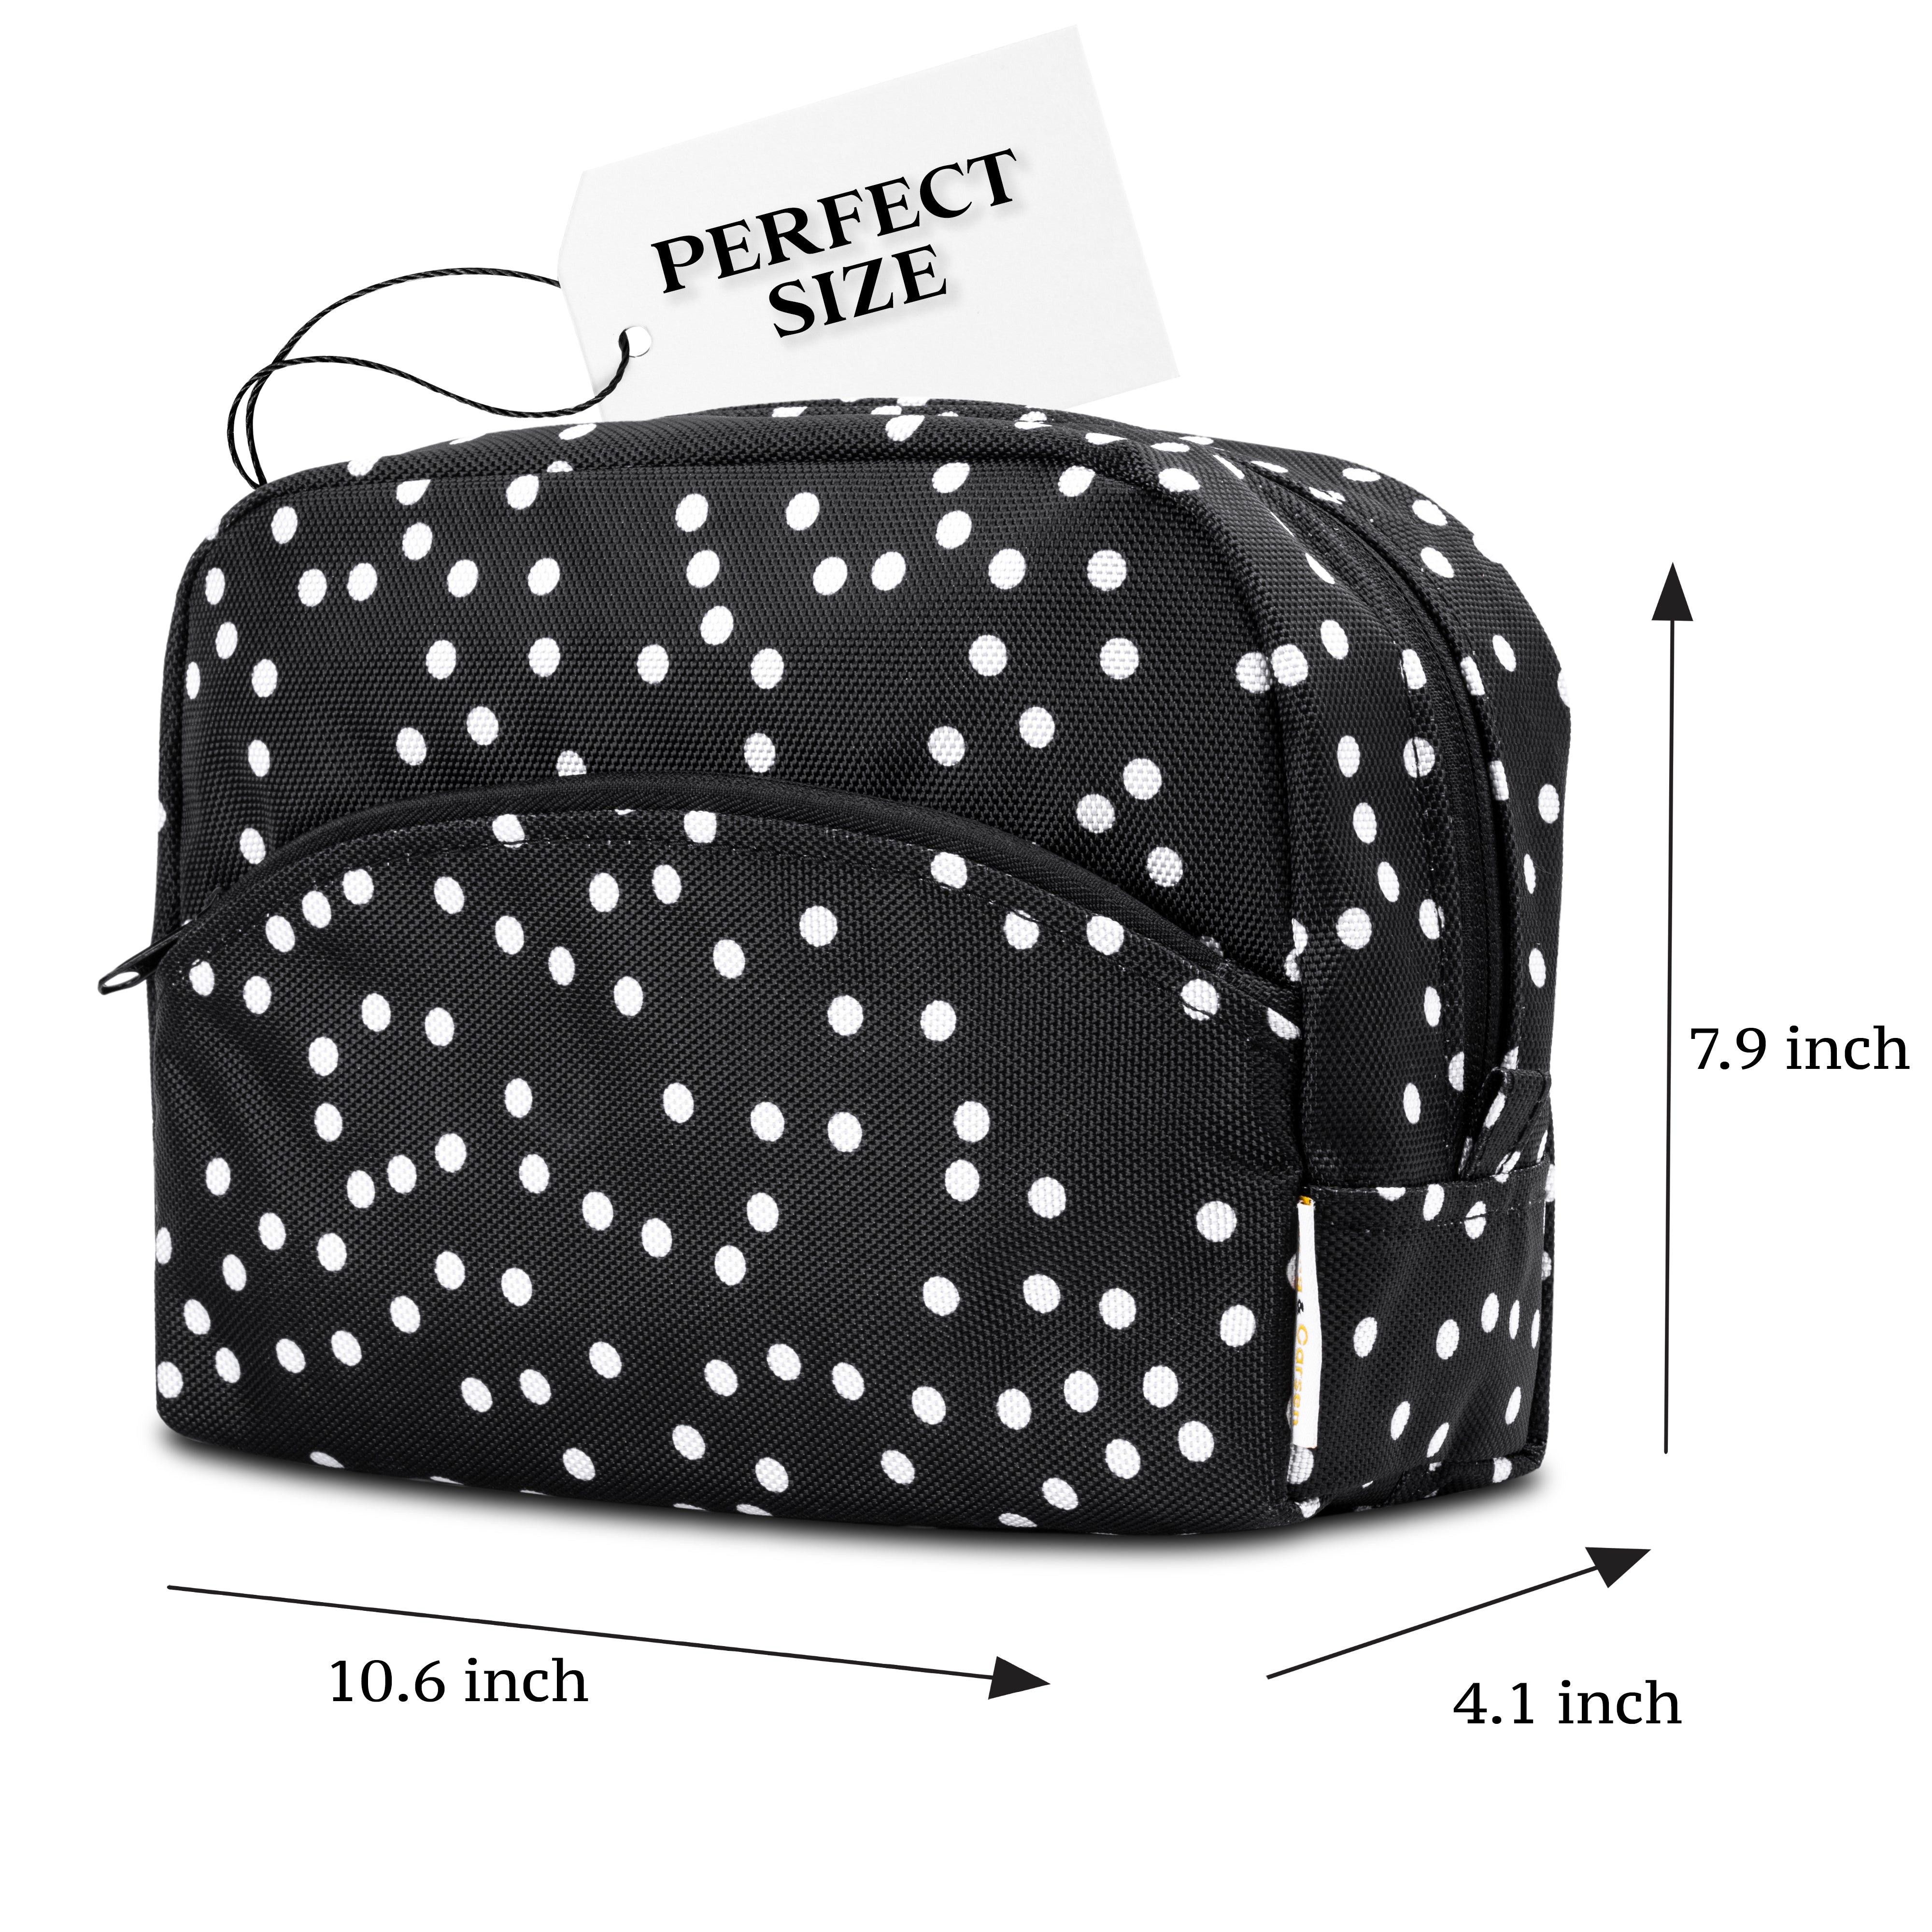 Large Makeup Bag For Women - Zippered Travel Cosmetic Bag - Versatile Leakproof Makeup Pouch